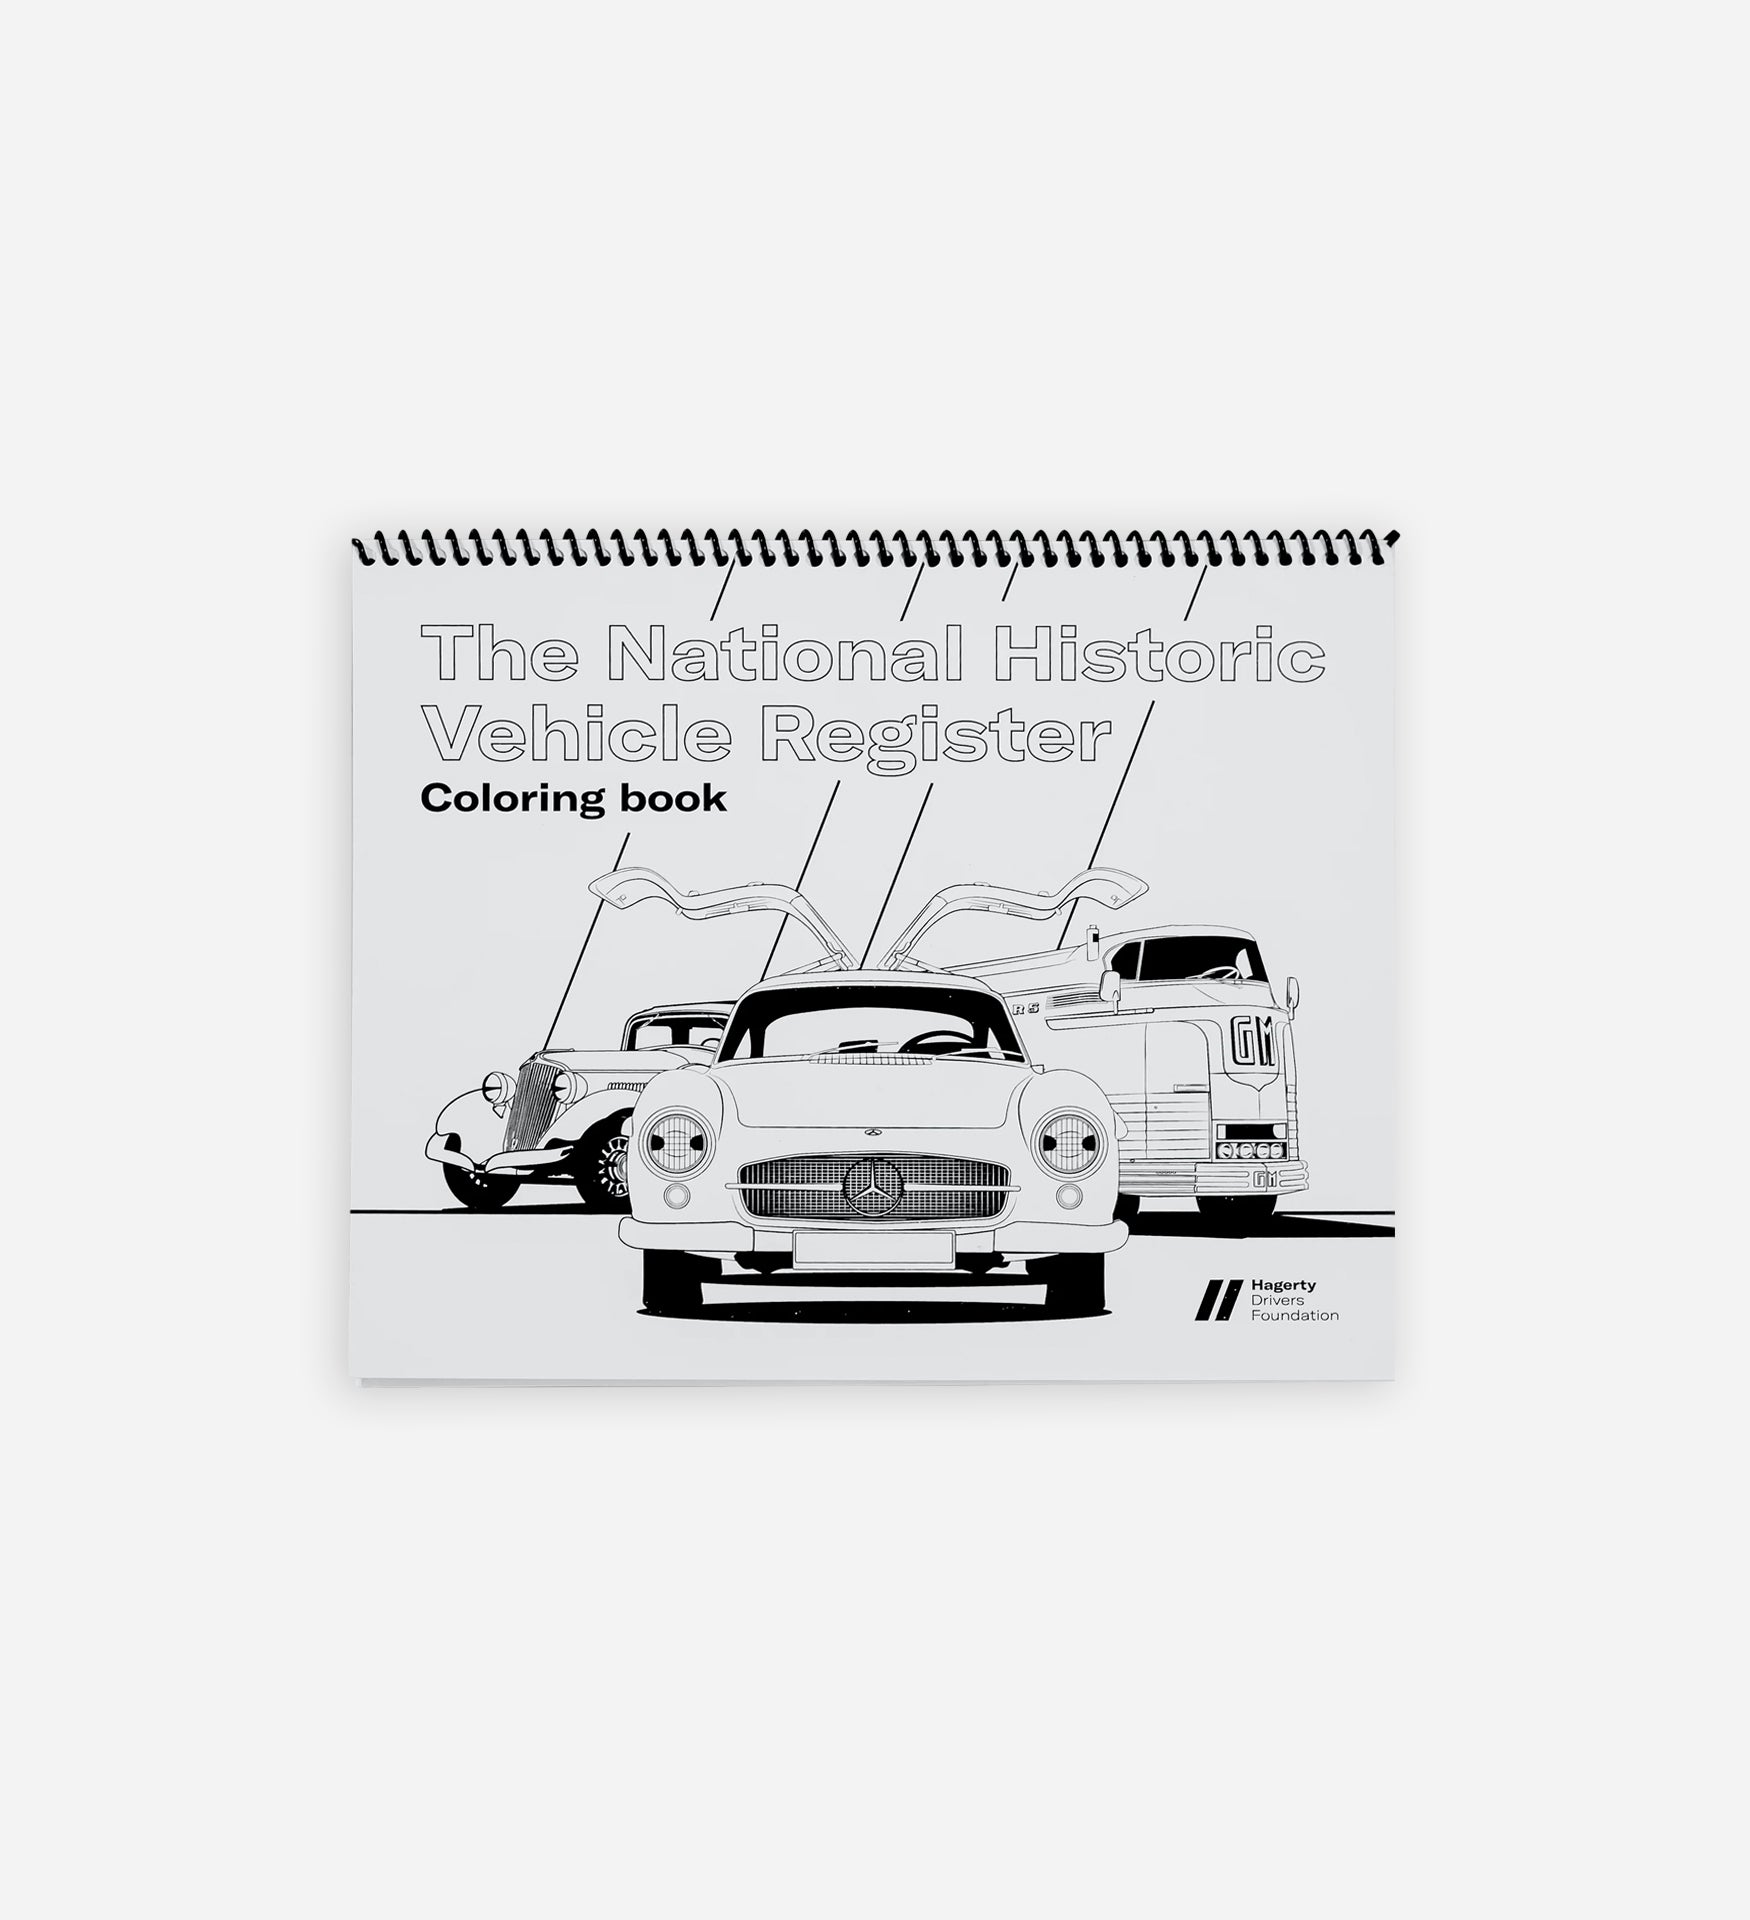 The National Historic Vehicle Register Coloring Book